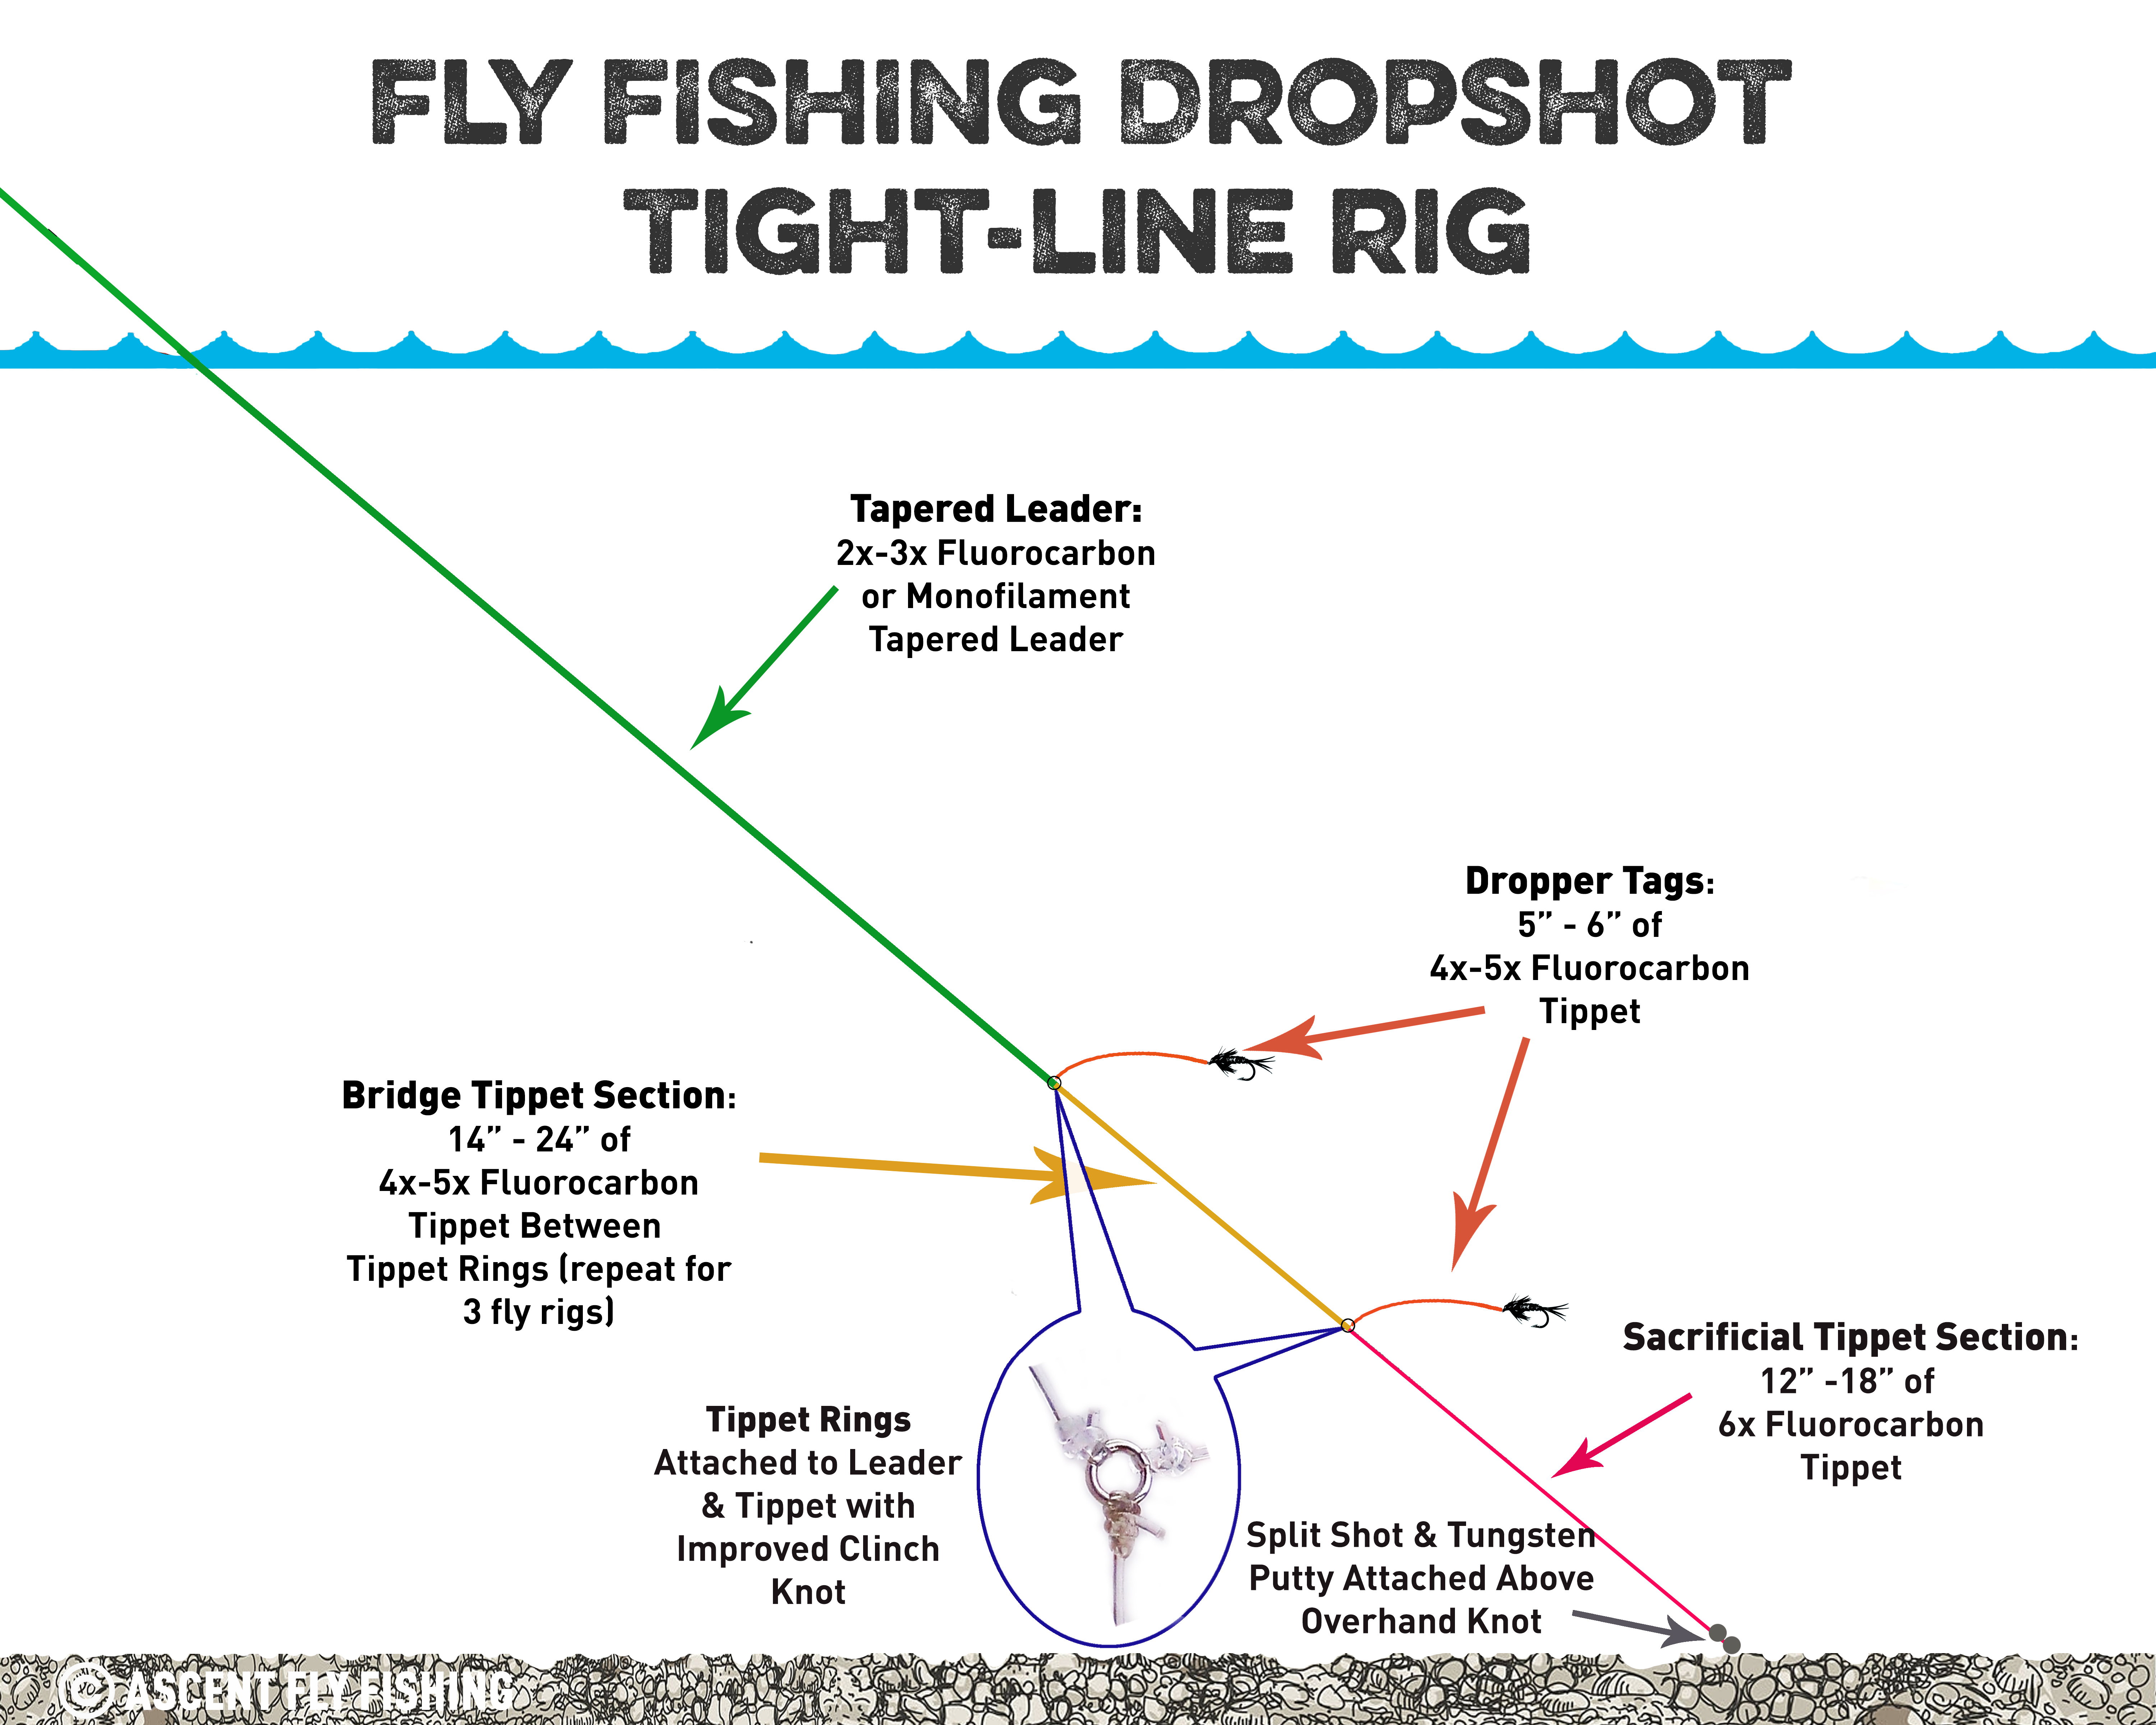 How to Use a Fly Fishing Drop-Shot Rig - Wambolt & Associates